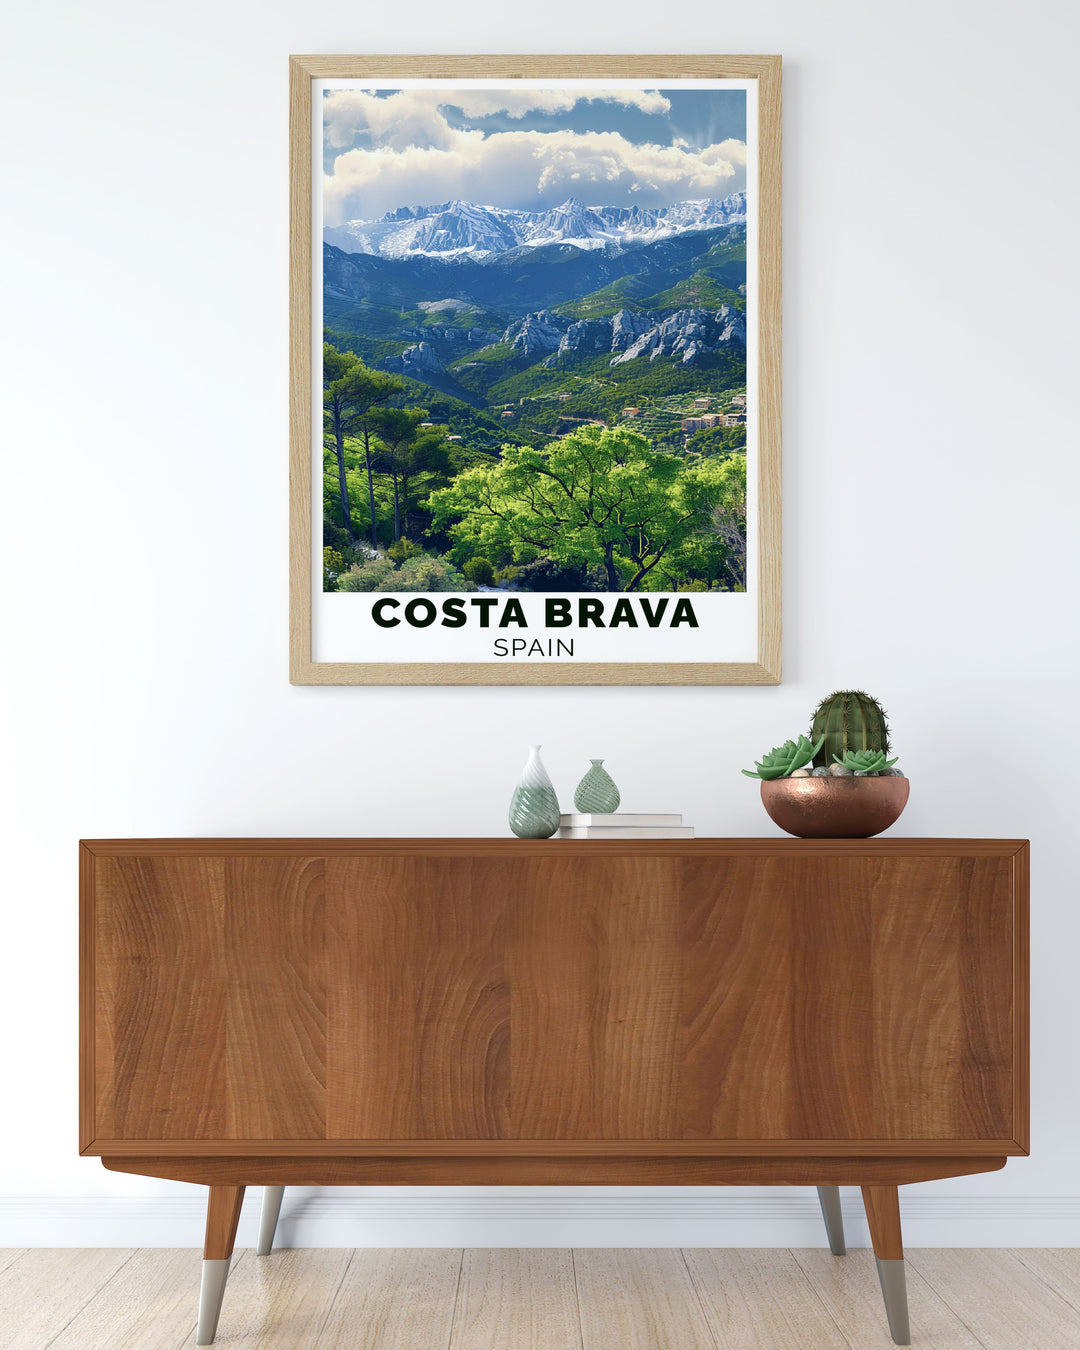 Celebrate the untouched beauty of Spain with a fine art print of Costa Brava National Park, reflecting its stunning coastal scenery and rich heritage.